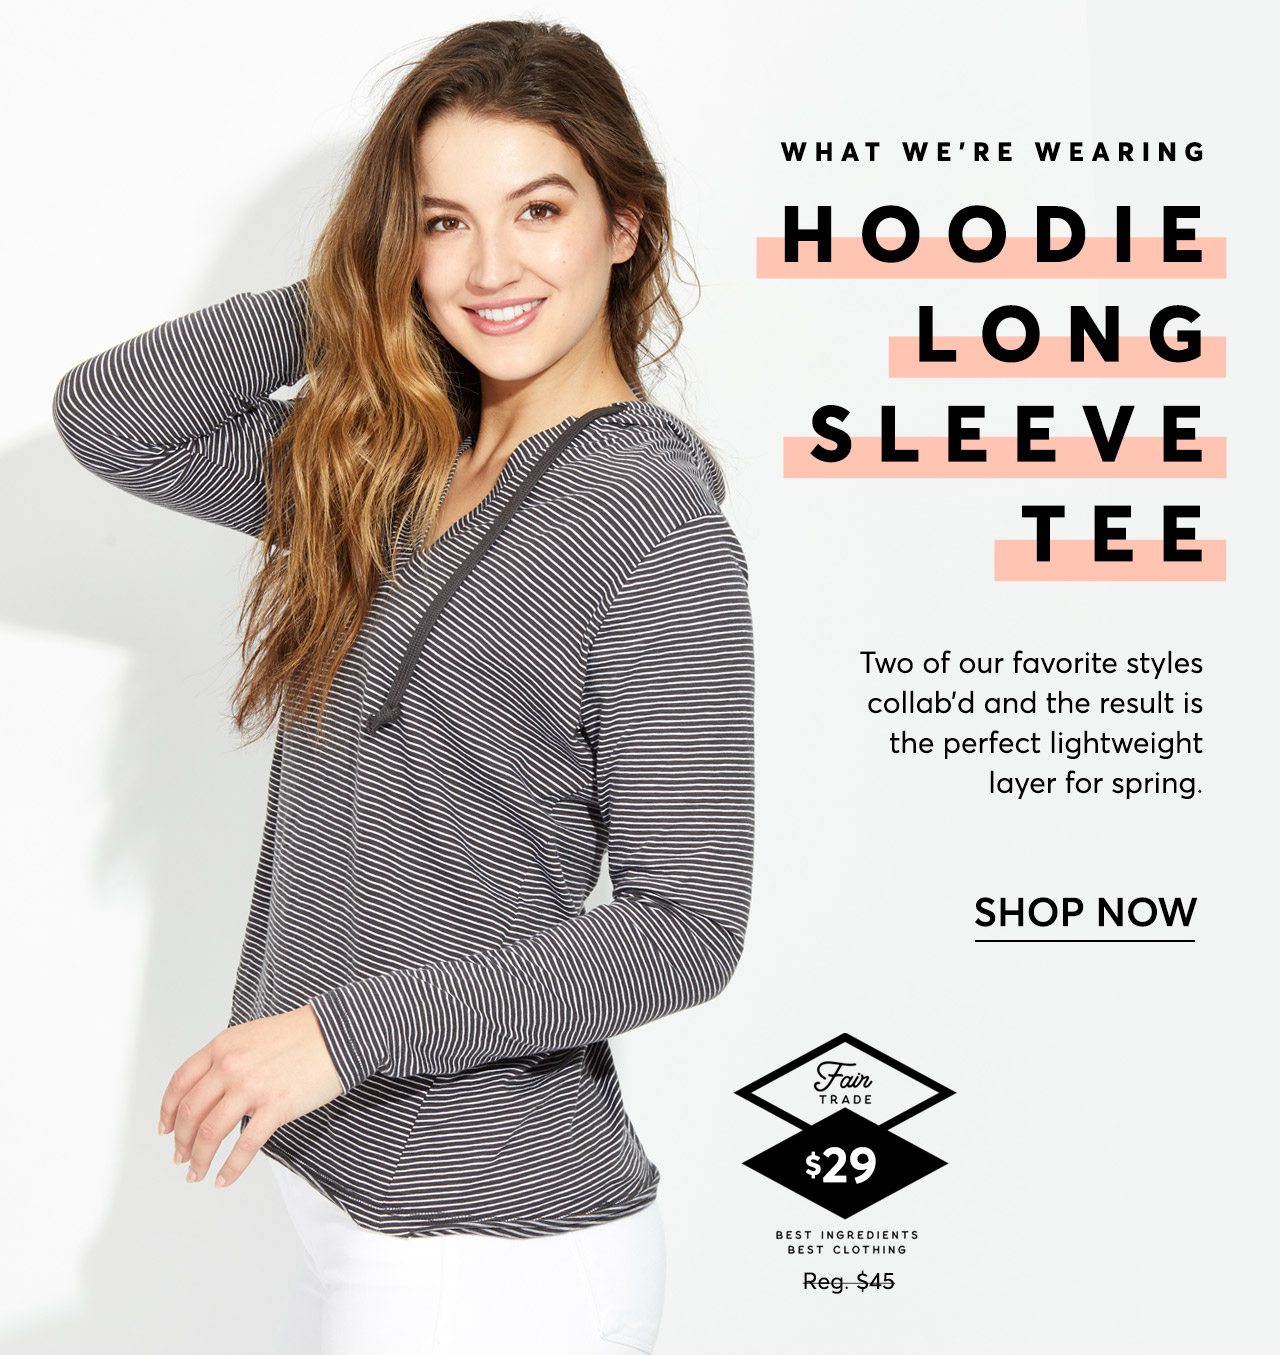 What we're wearing: Hoodie Long Sleeve Tee. Two of our favorite styles collab'd and the result is the perfect lightweight layer for spring. $29 this week only. Shop Now.